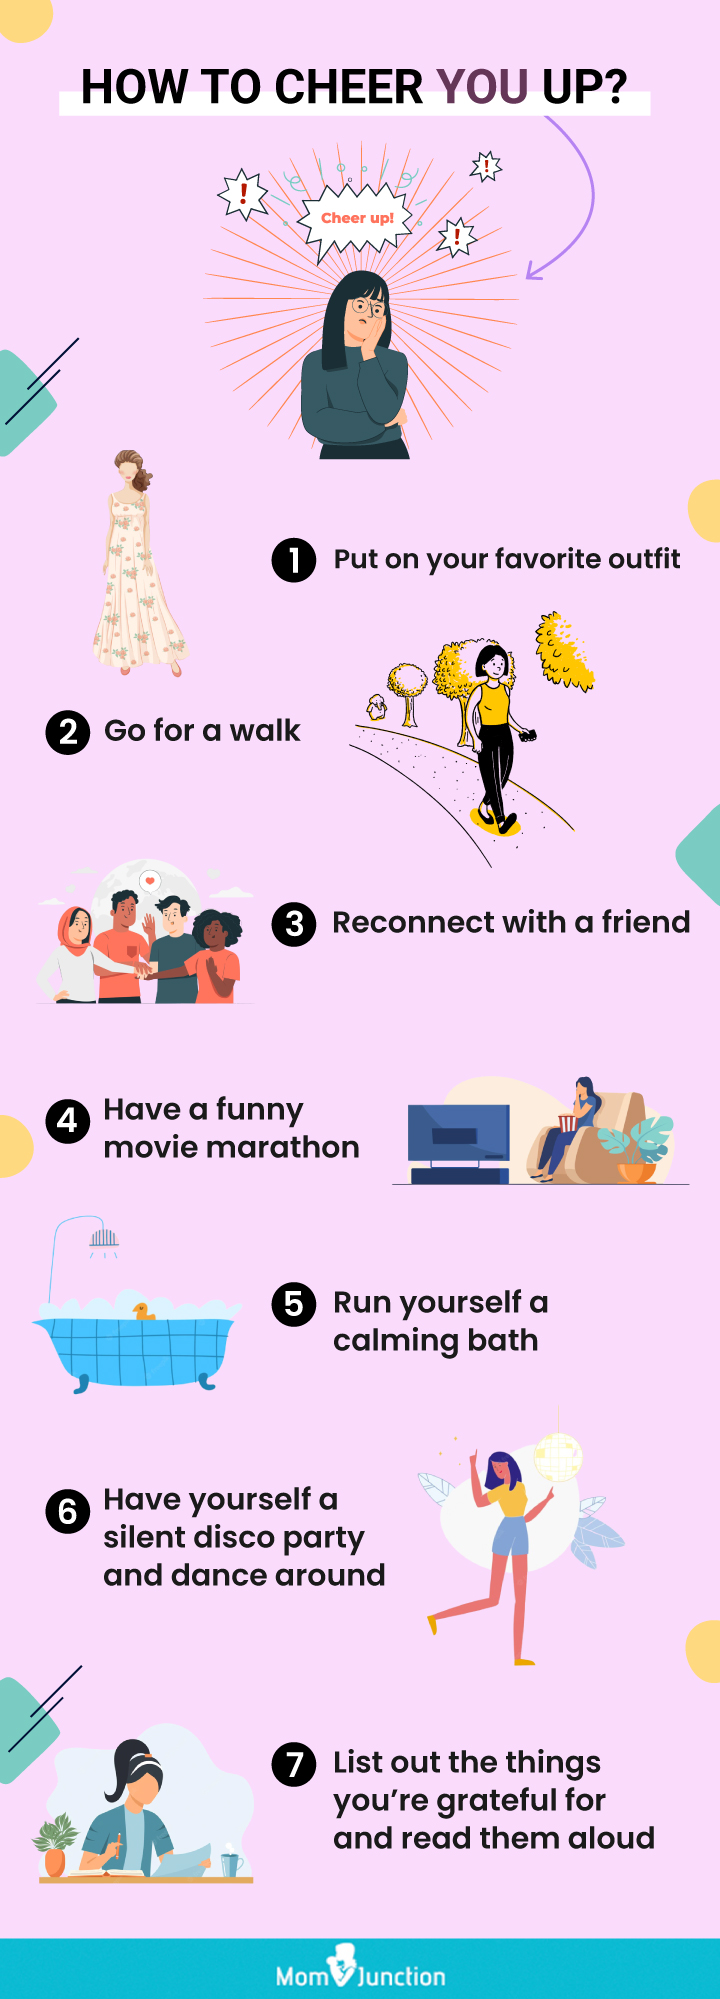 how to cheer you up [infographic]